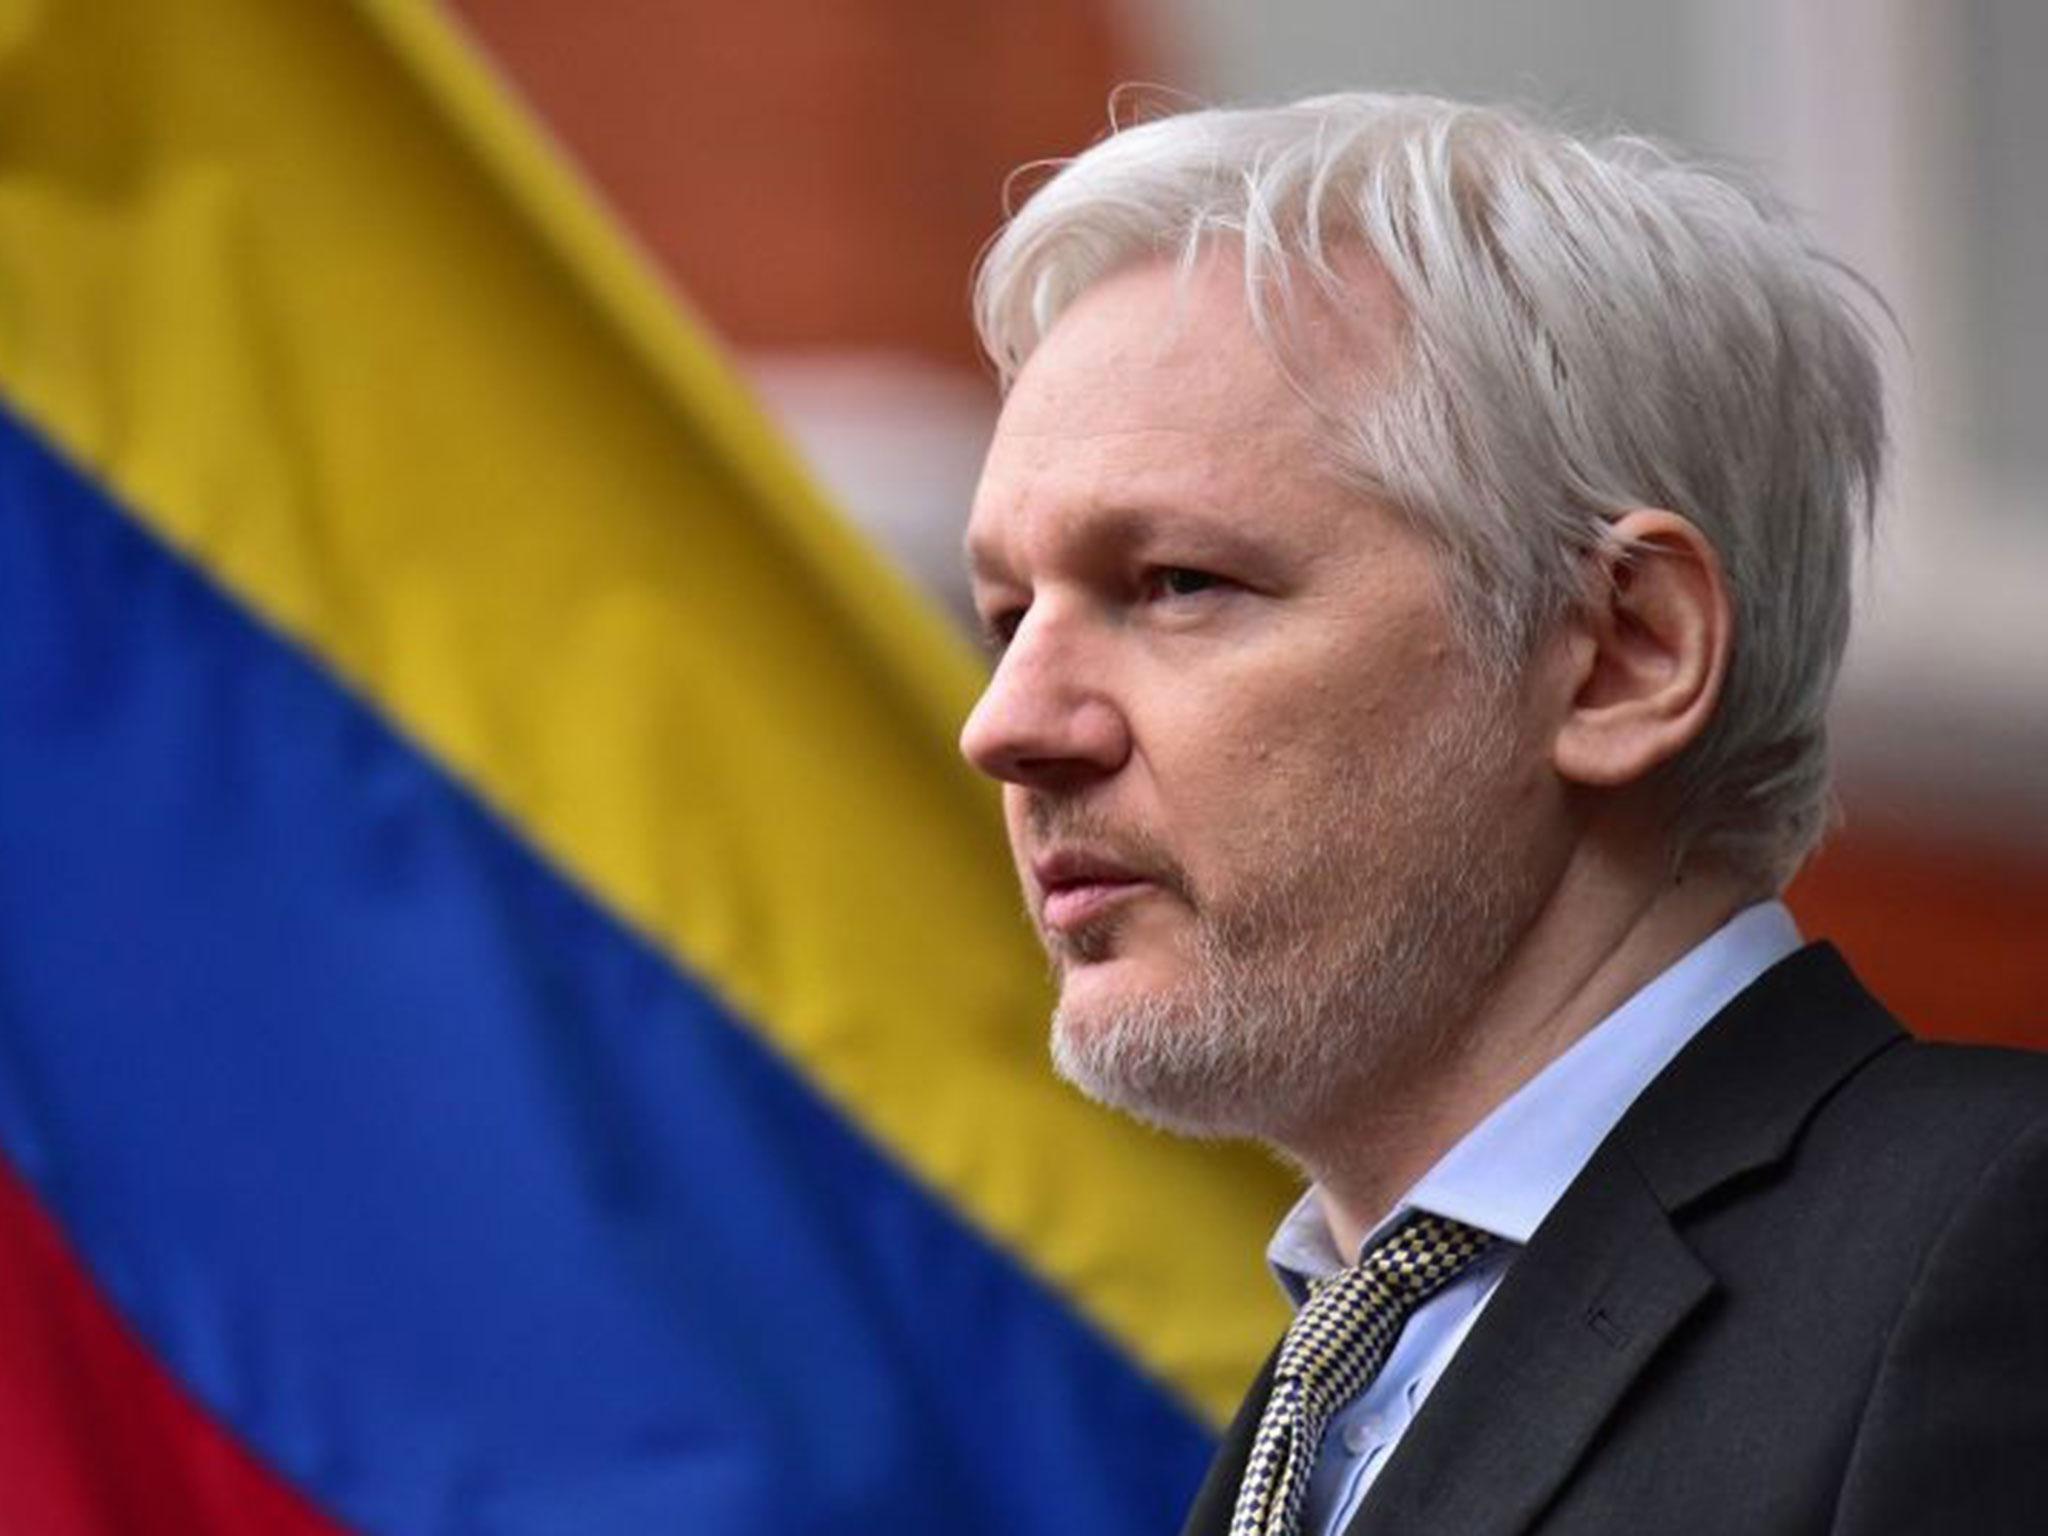 File photo of Julian Assange dated 05/02/16, as Sweden's Court of Appeal has refused a bid by the WikiLeaks founder to have his case 'set aside', saying no new information has emerged